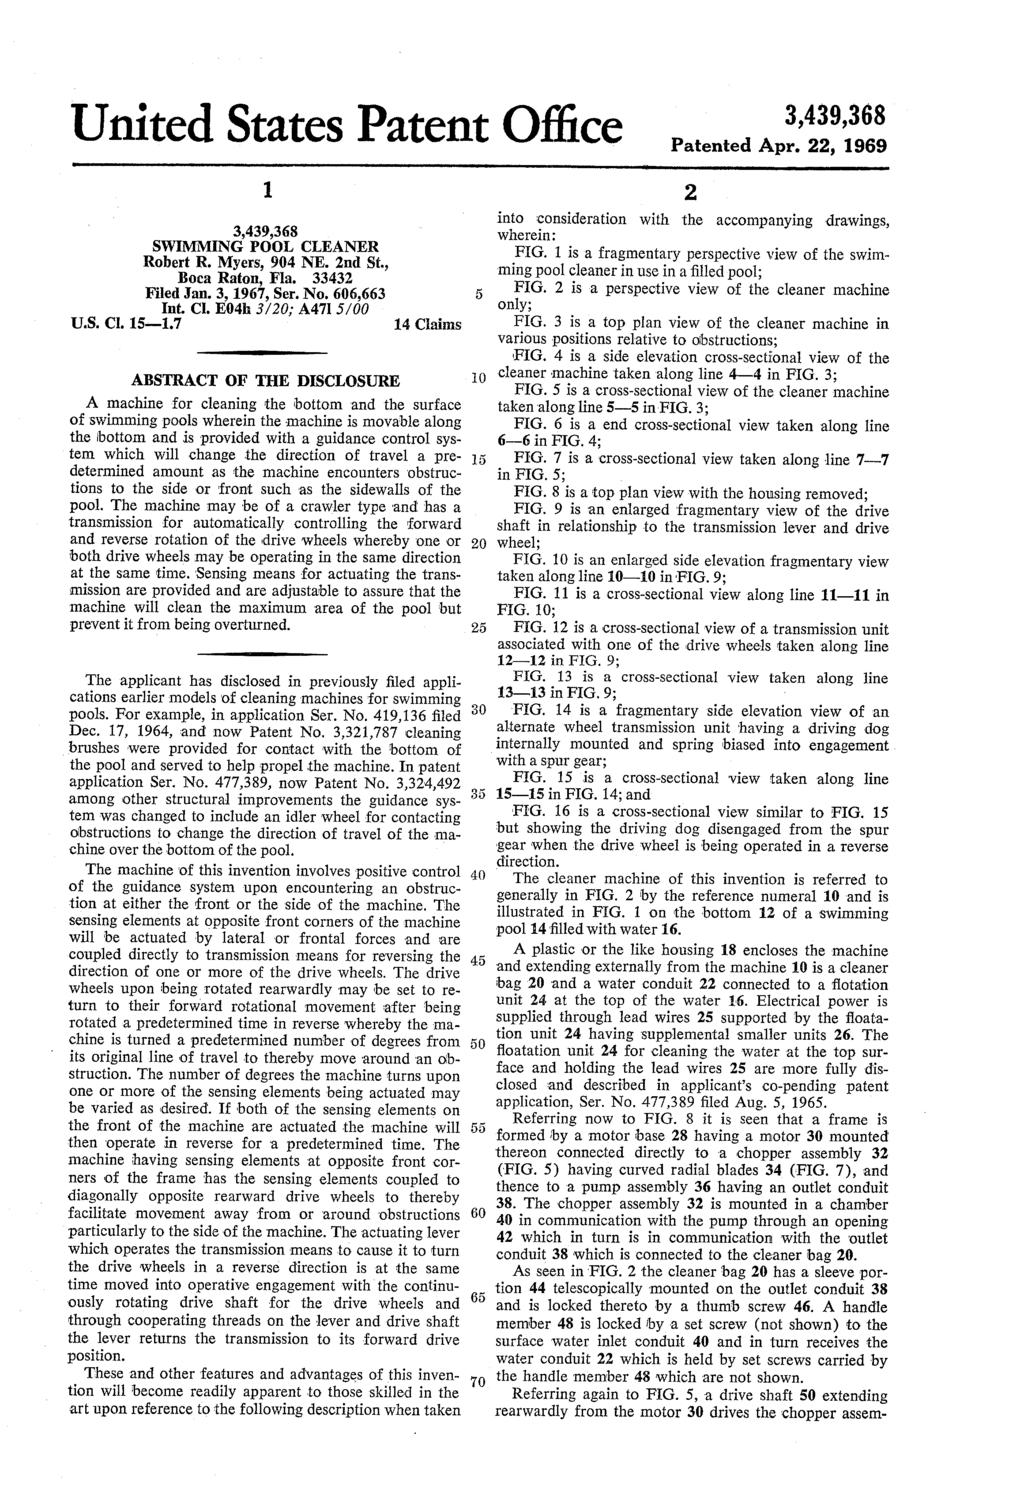 United States Patent Office 3,439,368 Patented Apr. 22, 1969 3,439,368 SWMMING POOL CLEANER Robert R. Myers, 904 NE. 2nd St., Boca Raton, Fla. 33432 Filed Jan. 3, 1967, Ser. No. 606,663 Int. CI.